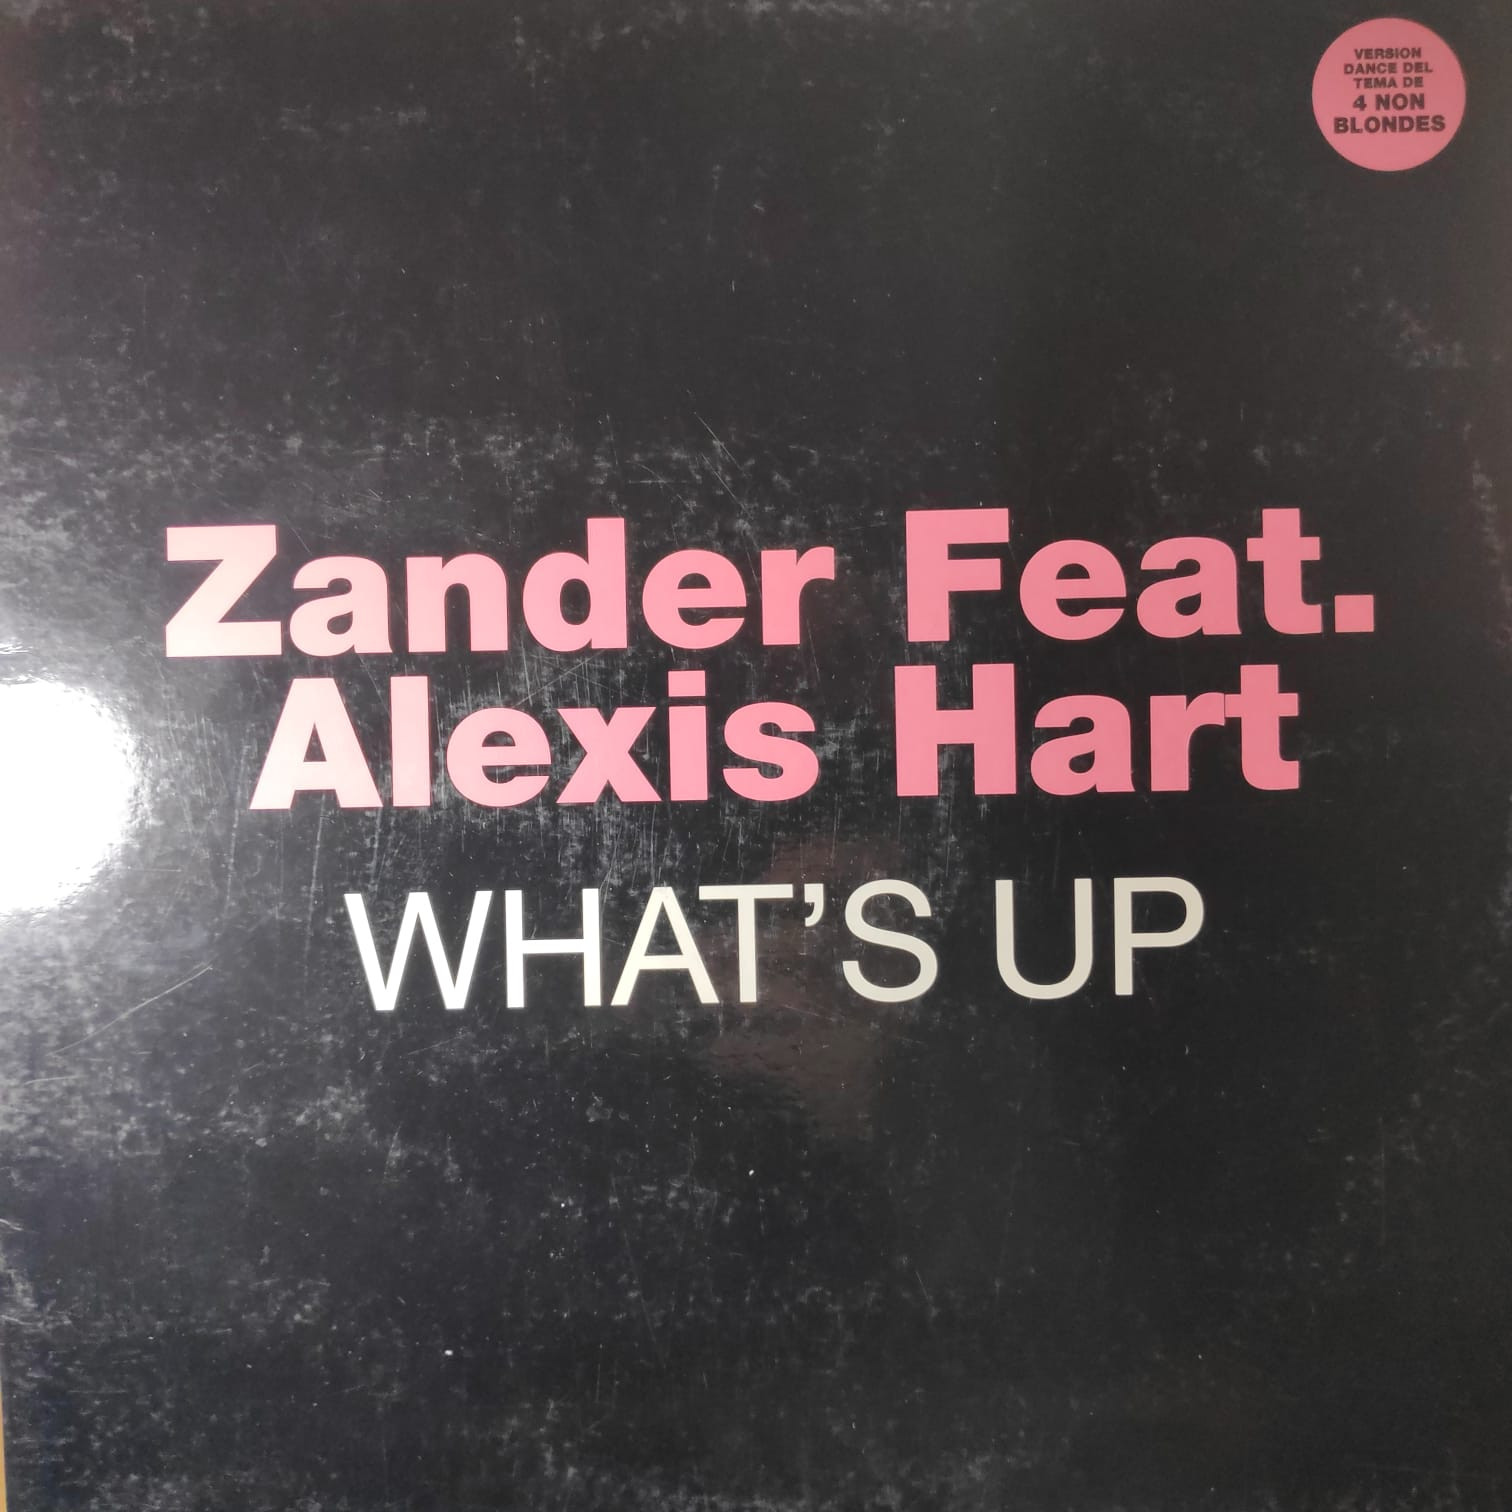 (CUB1250) Zander Feat. Alexis Hart ‎– What's Up